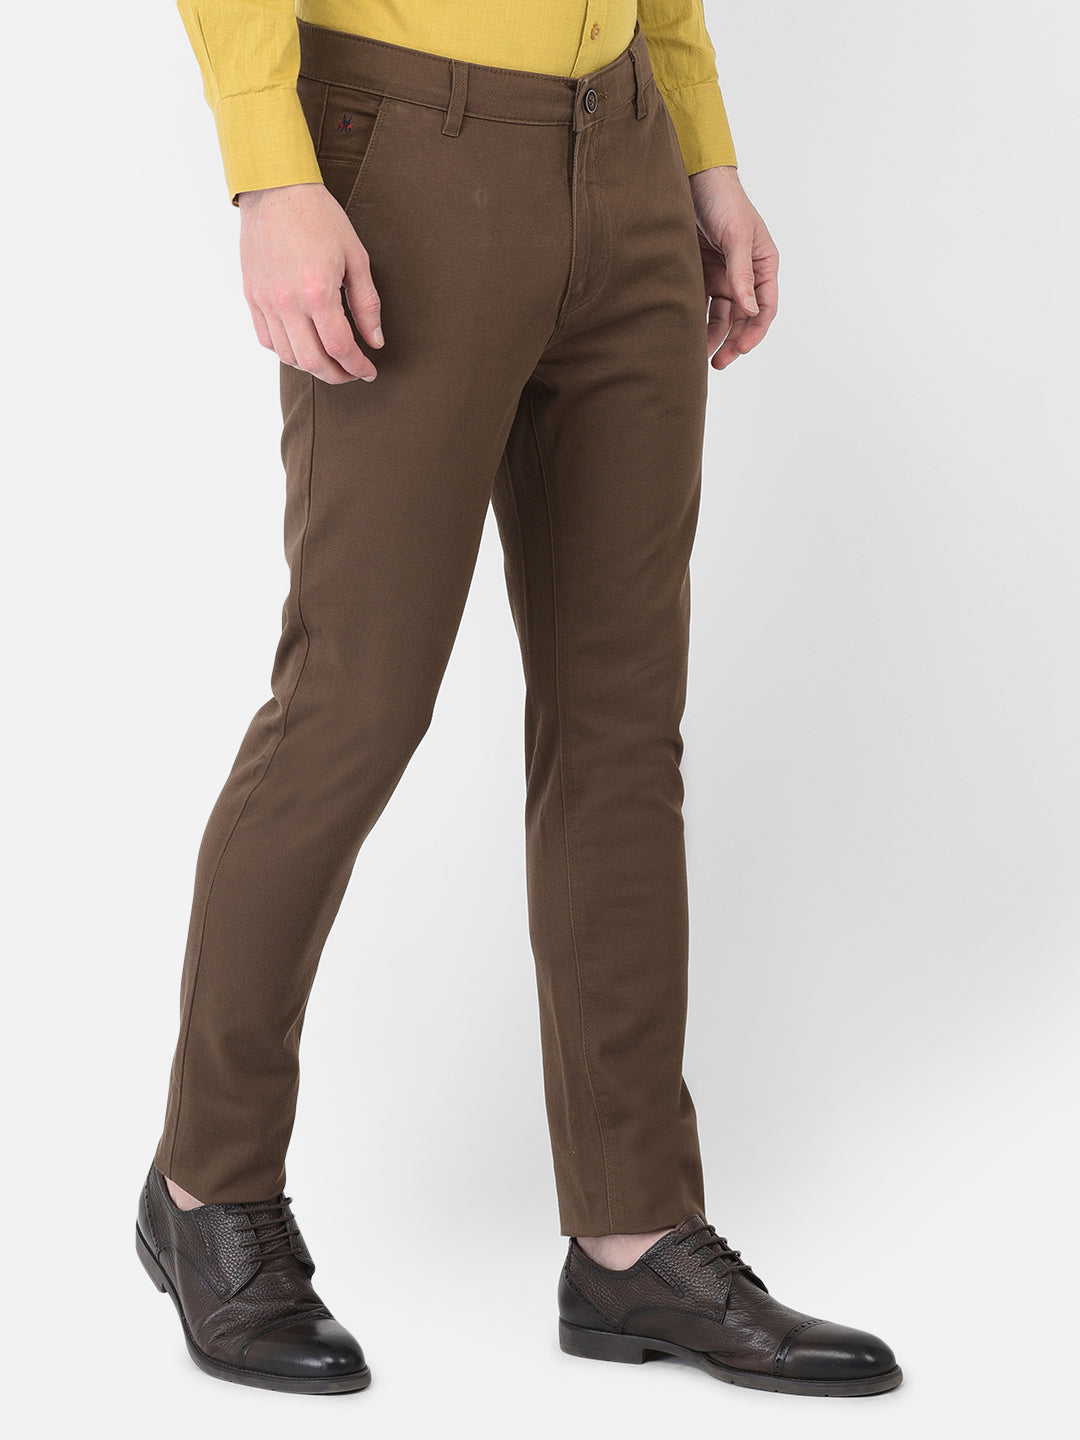 Brown Trousers - Men Trousers